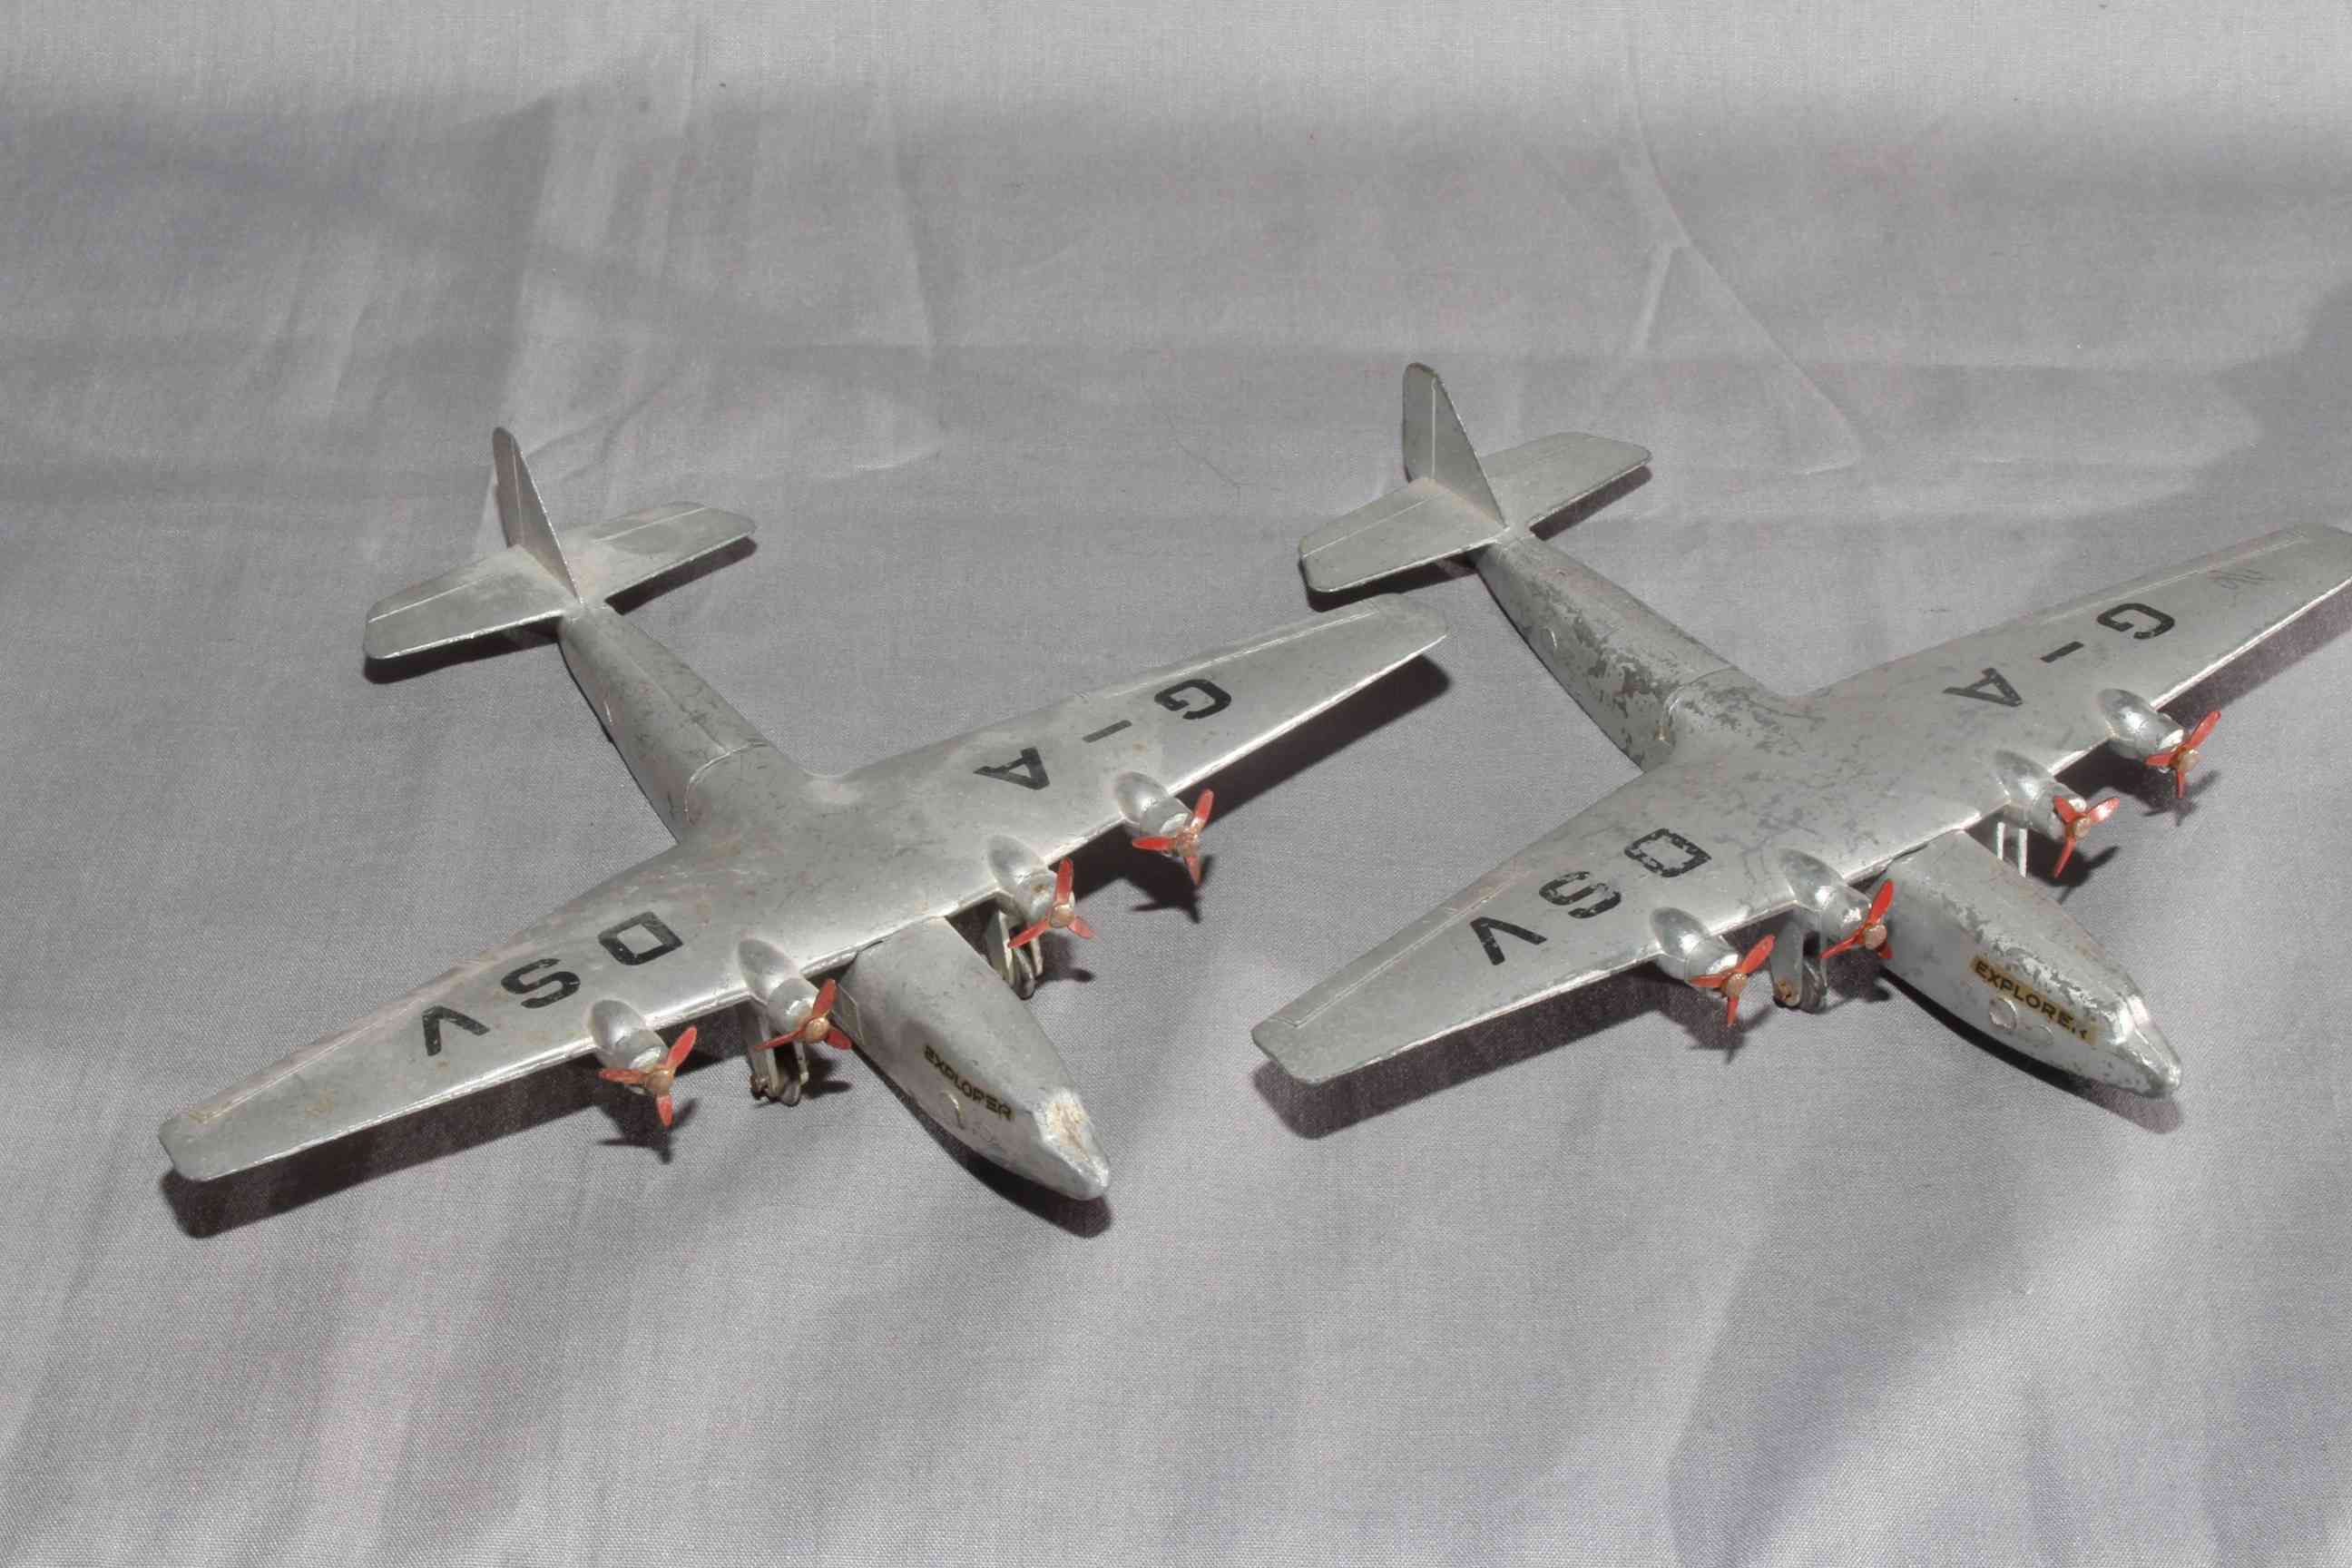 Six Dinky aircraft. 62p Armstrong Whitworth Air Liner, 70c Viking, Mercury Seaplane and Seaplane.